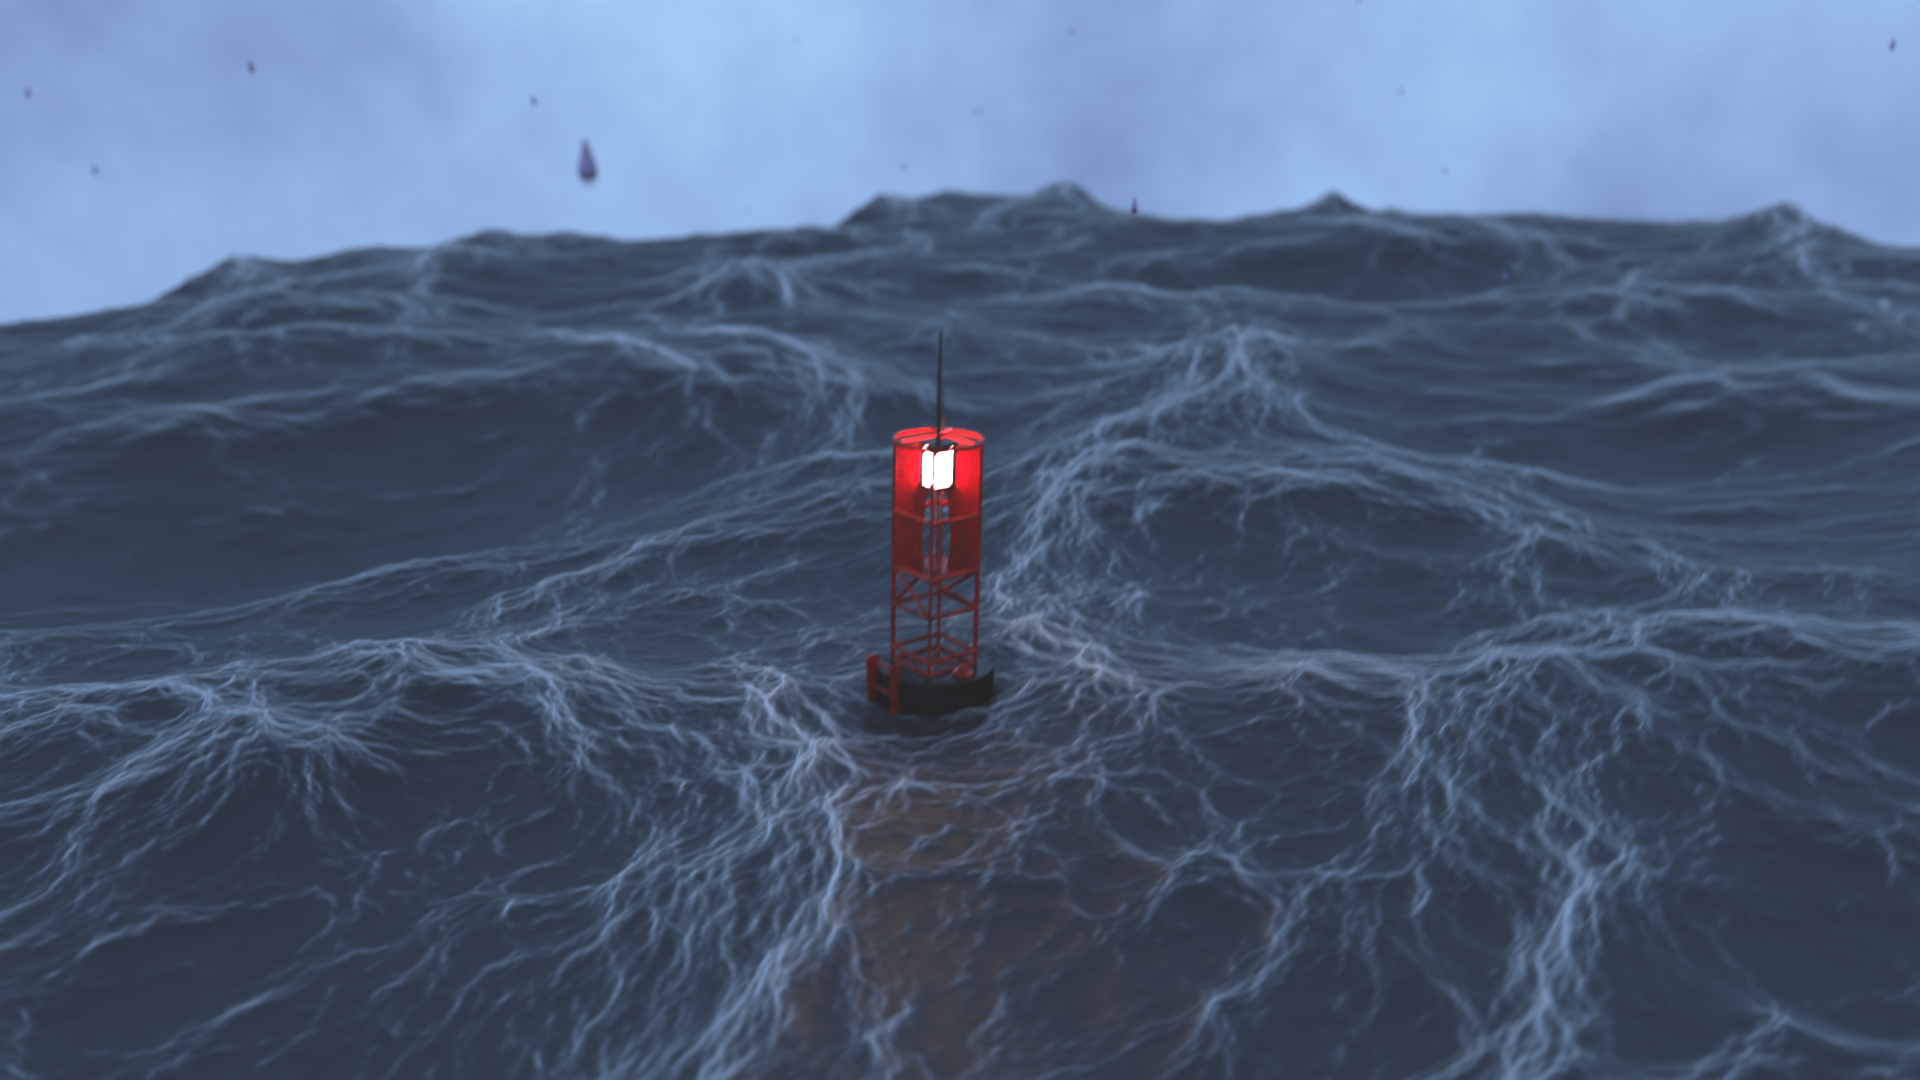 Ocean SImulation Blender 3.1.2 Cycles 3 preview image 1